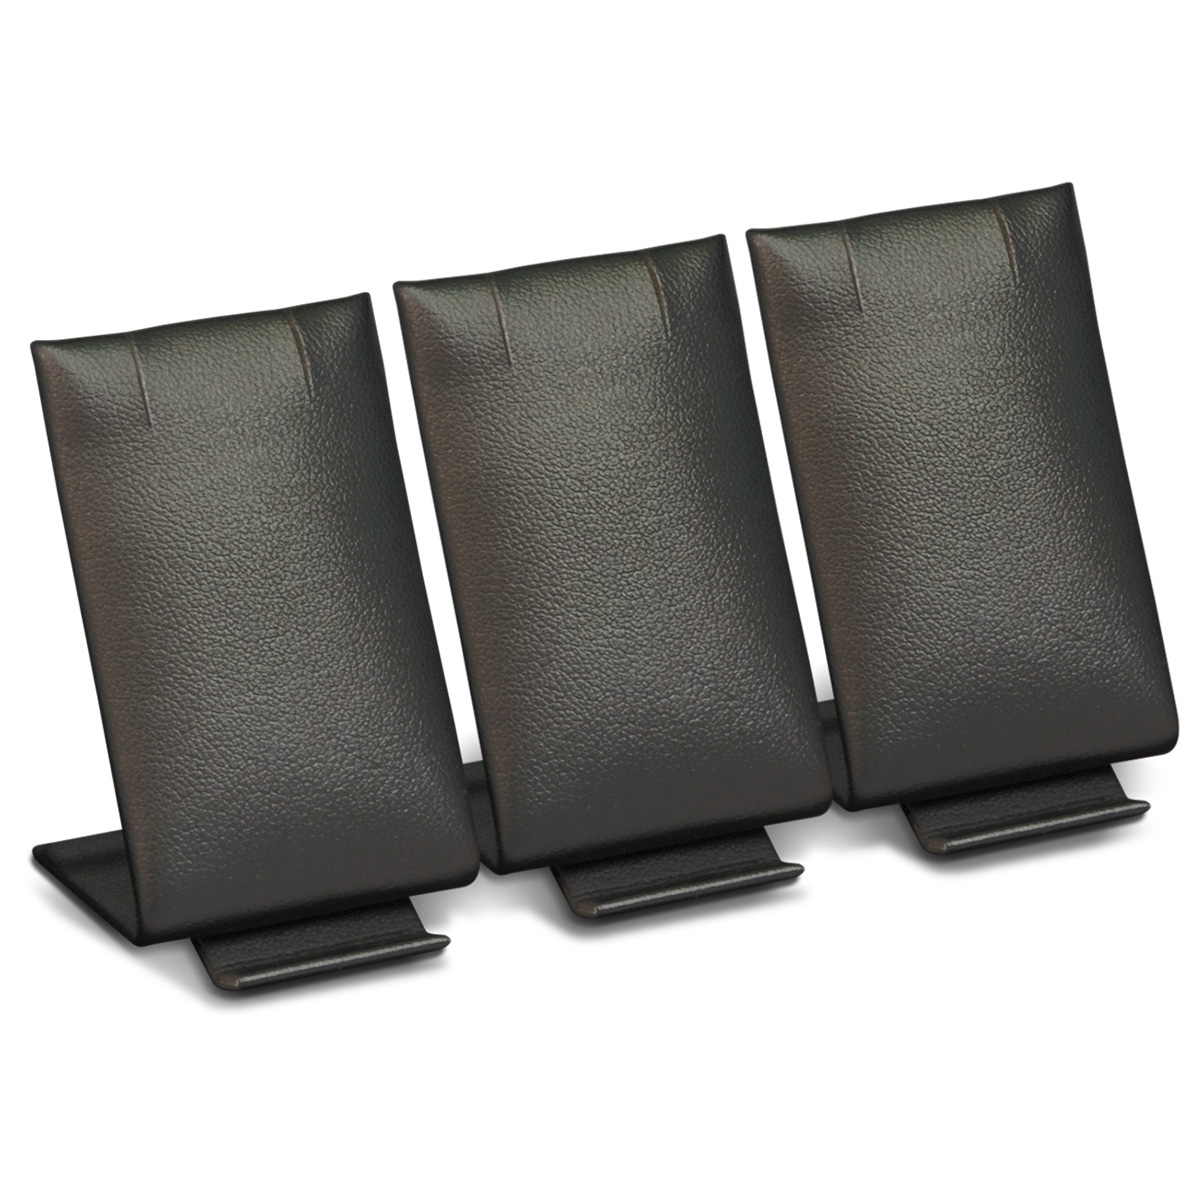 Triple presentation display for earrings, high, smooth leather imitation, black, LxWxD ca. 3,5 x 11,0 x 6,0 cm